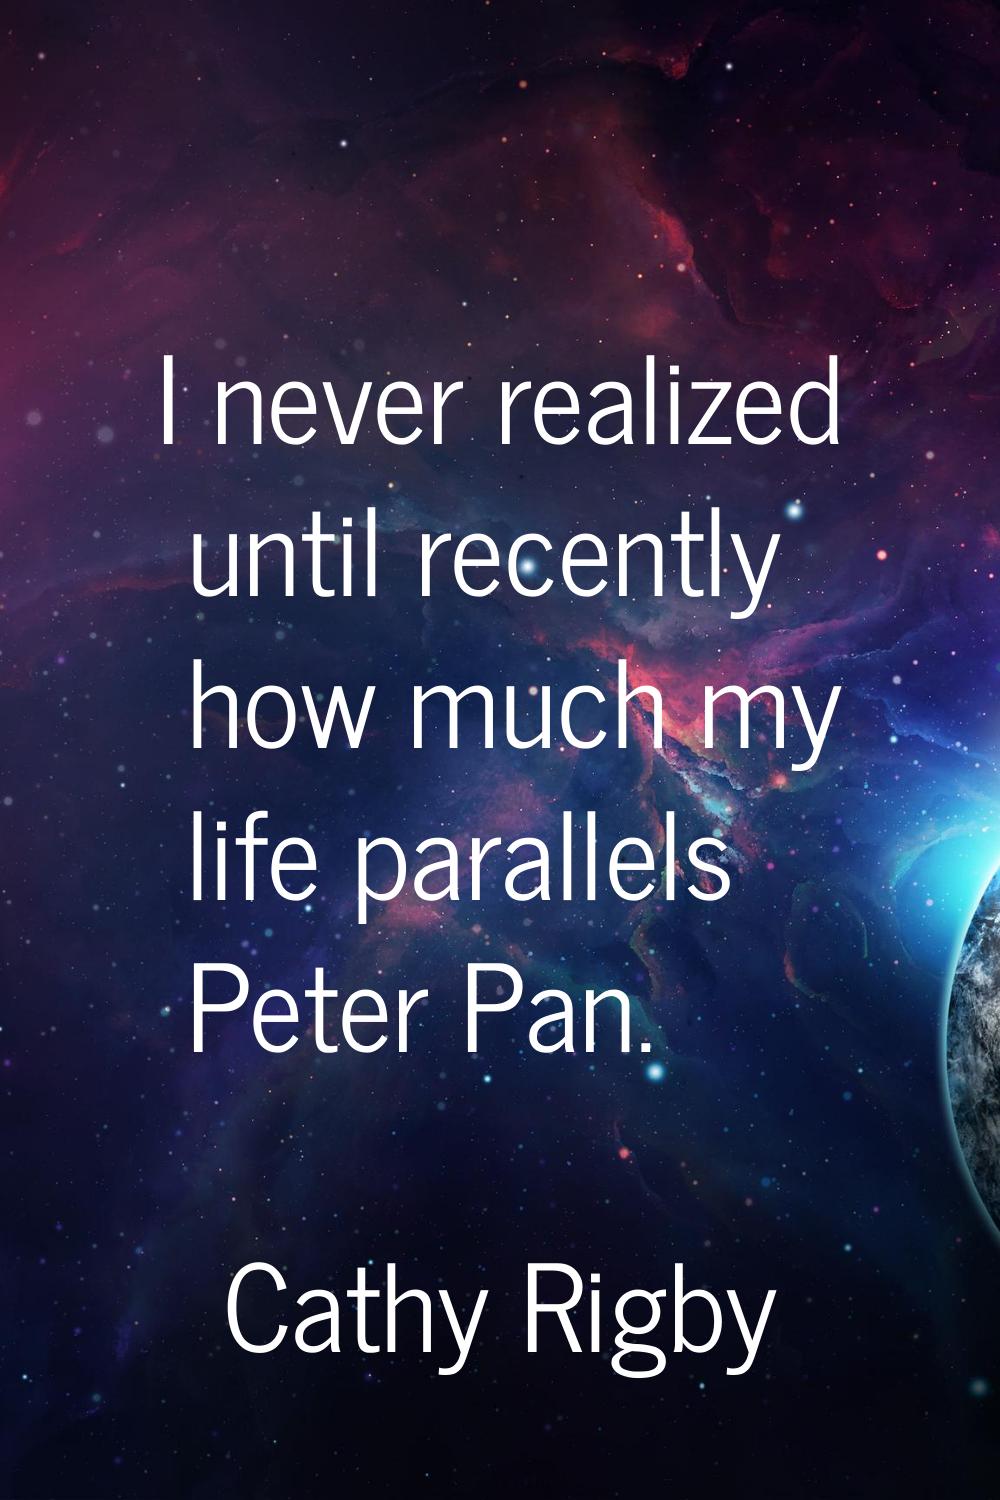 I never realized until recently how much my life parallels Peter Pan.